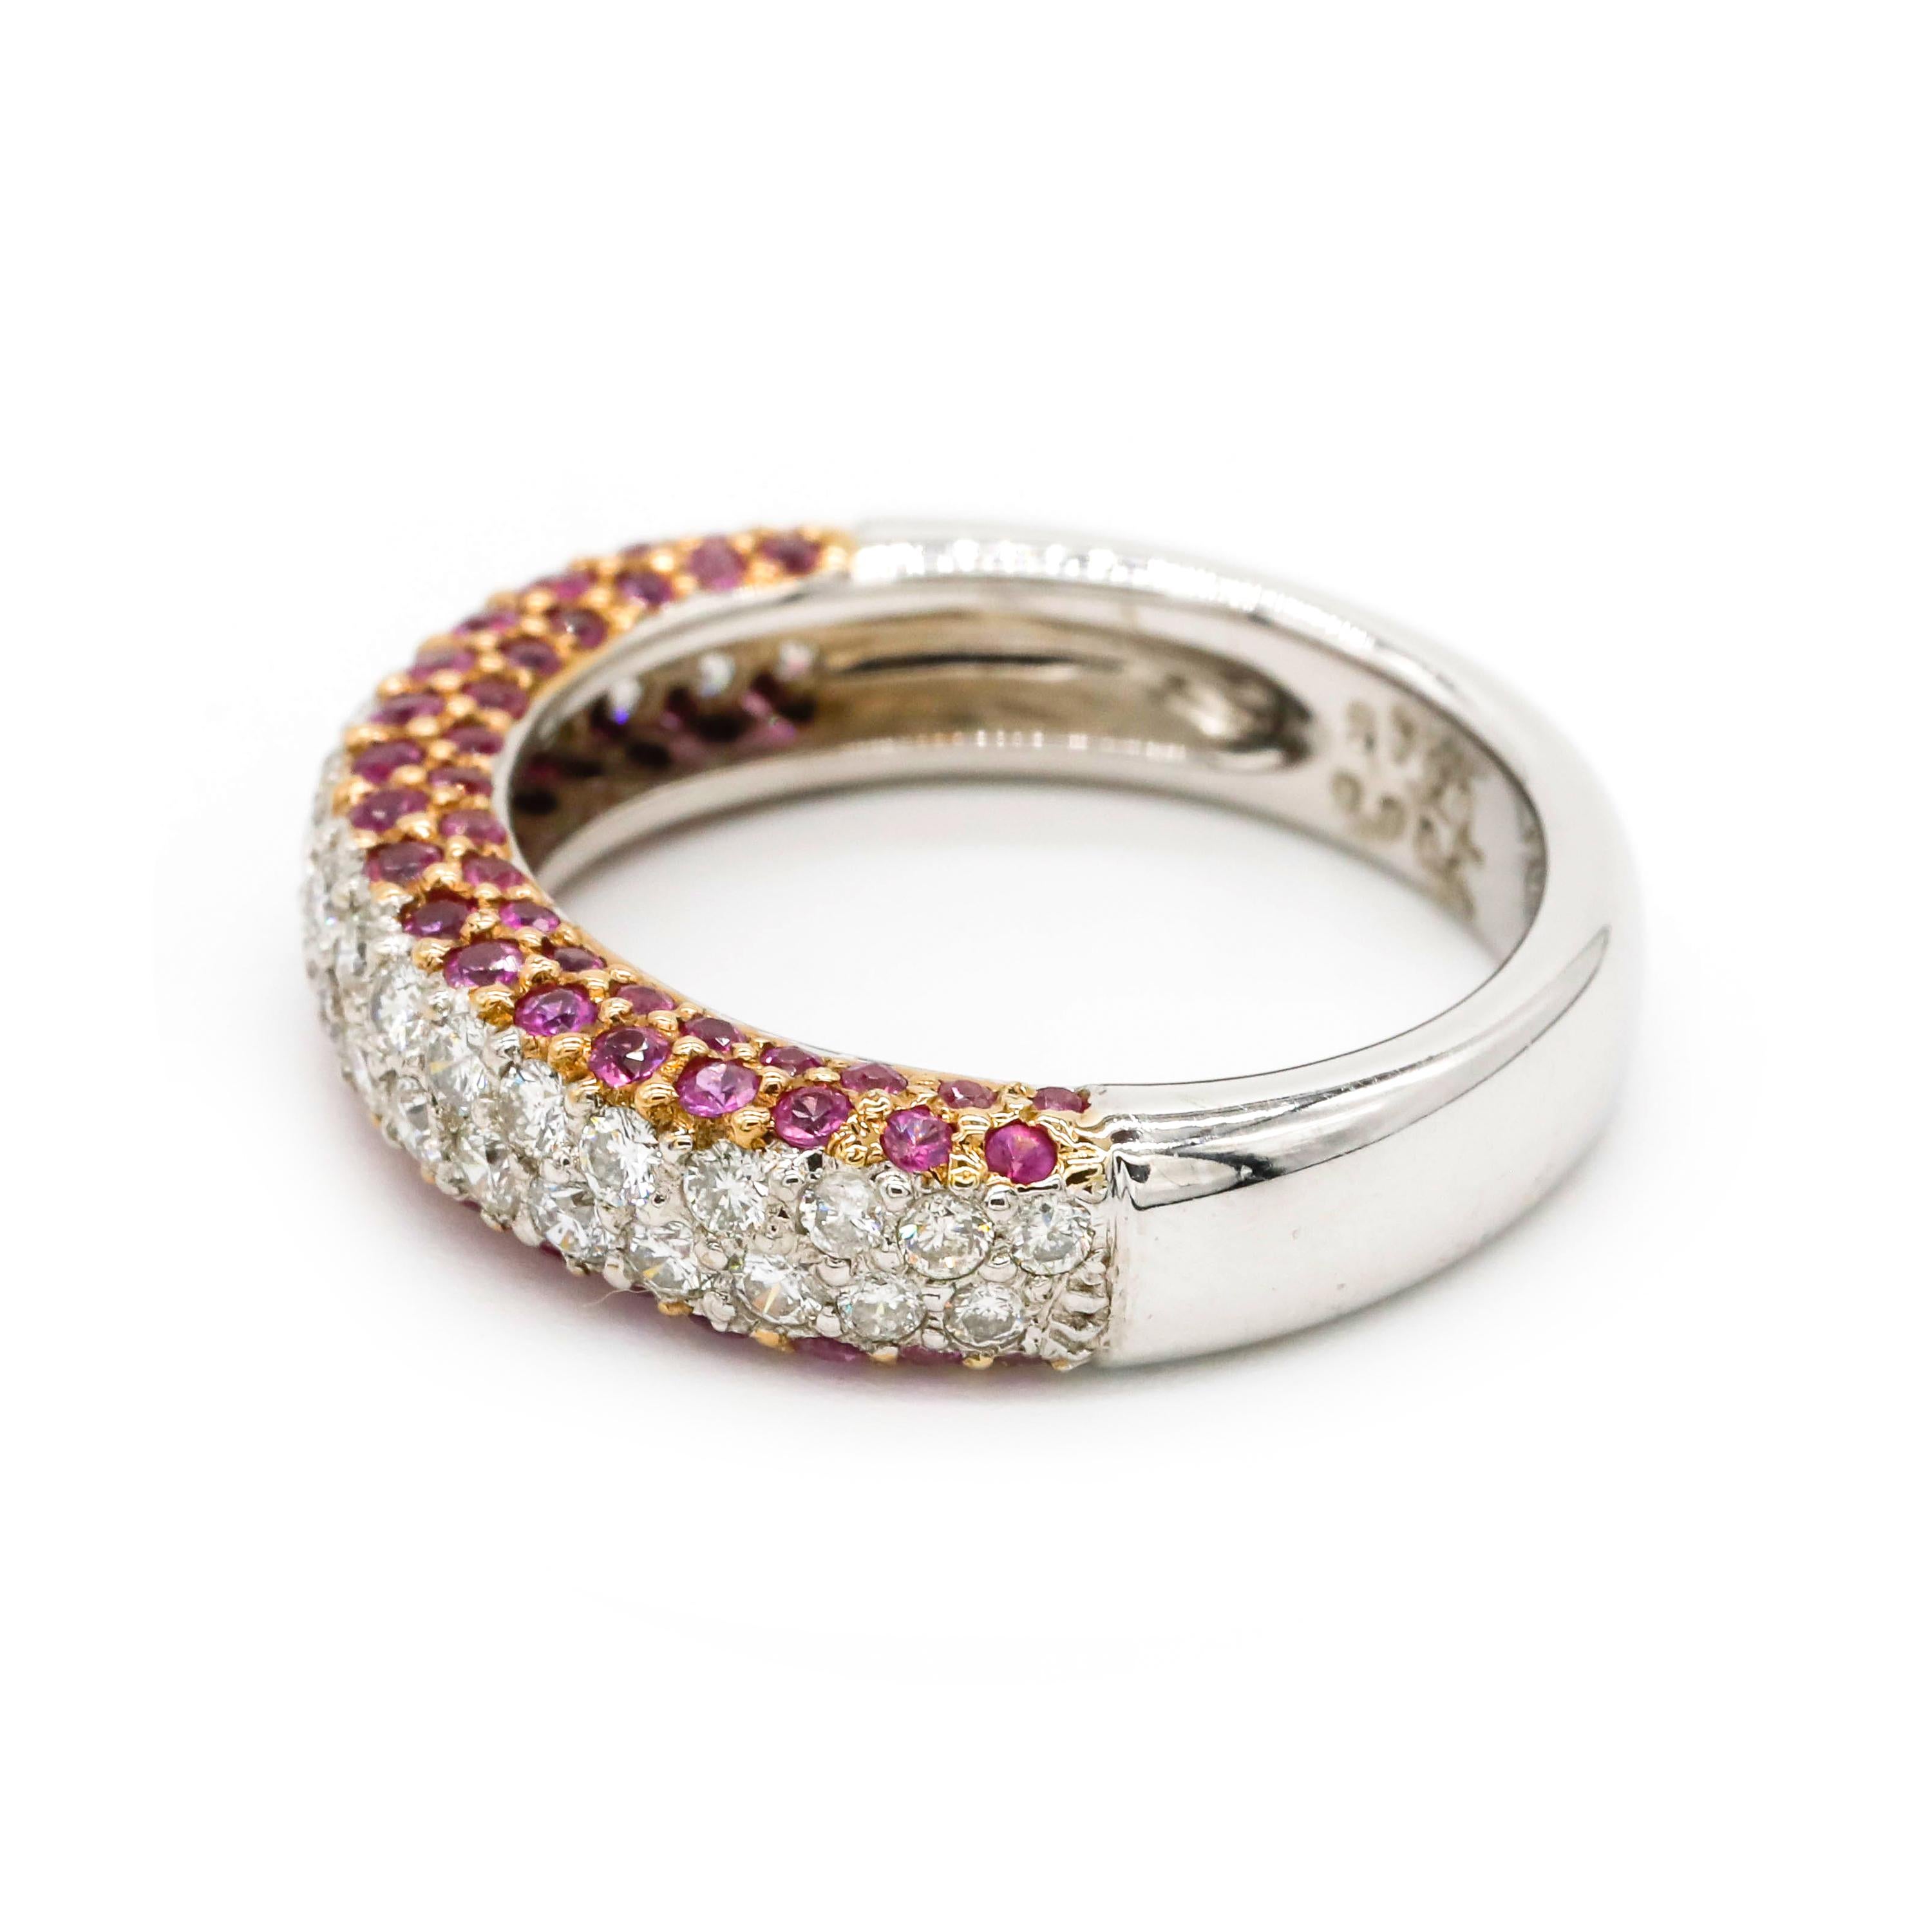 Round Cut Ruby Pave Setting Diamond Pave Band Ring in 18 k White Gold

A wedding band or an Anniversary ring - this ring is just perfection. Featuring a single row of natural ruby stones of Round cut, set in a prong setting. Buffed to a brilliant